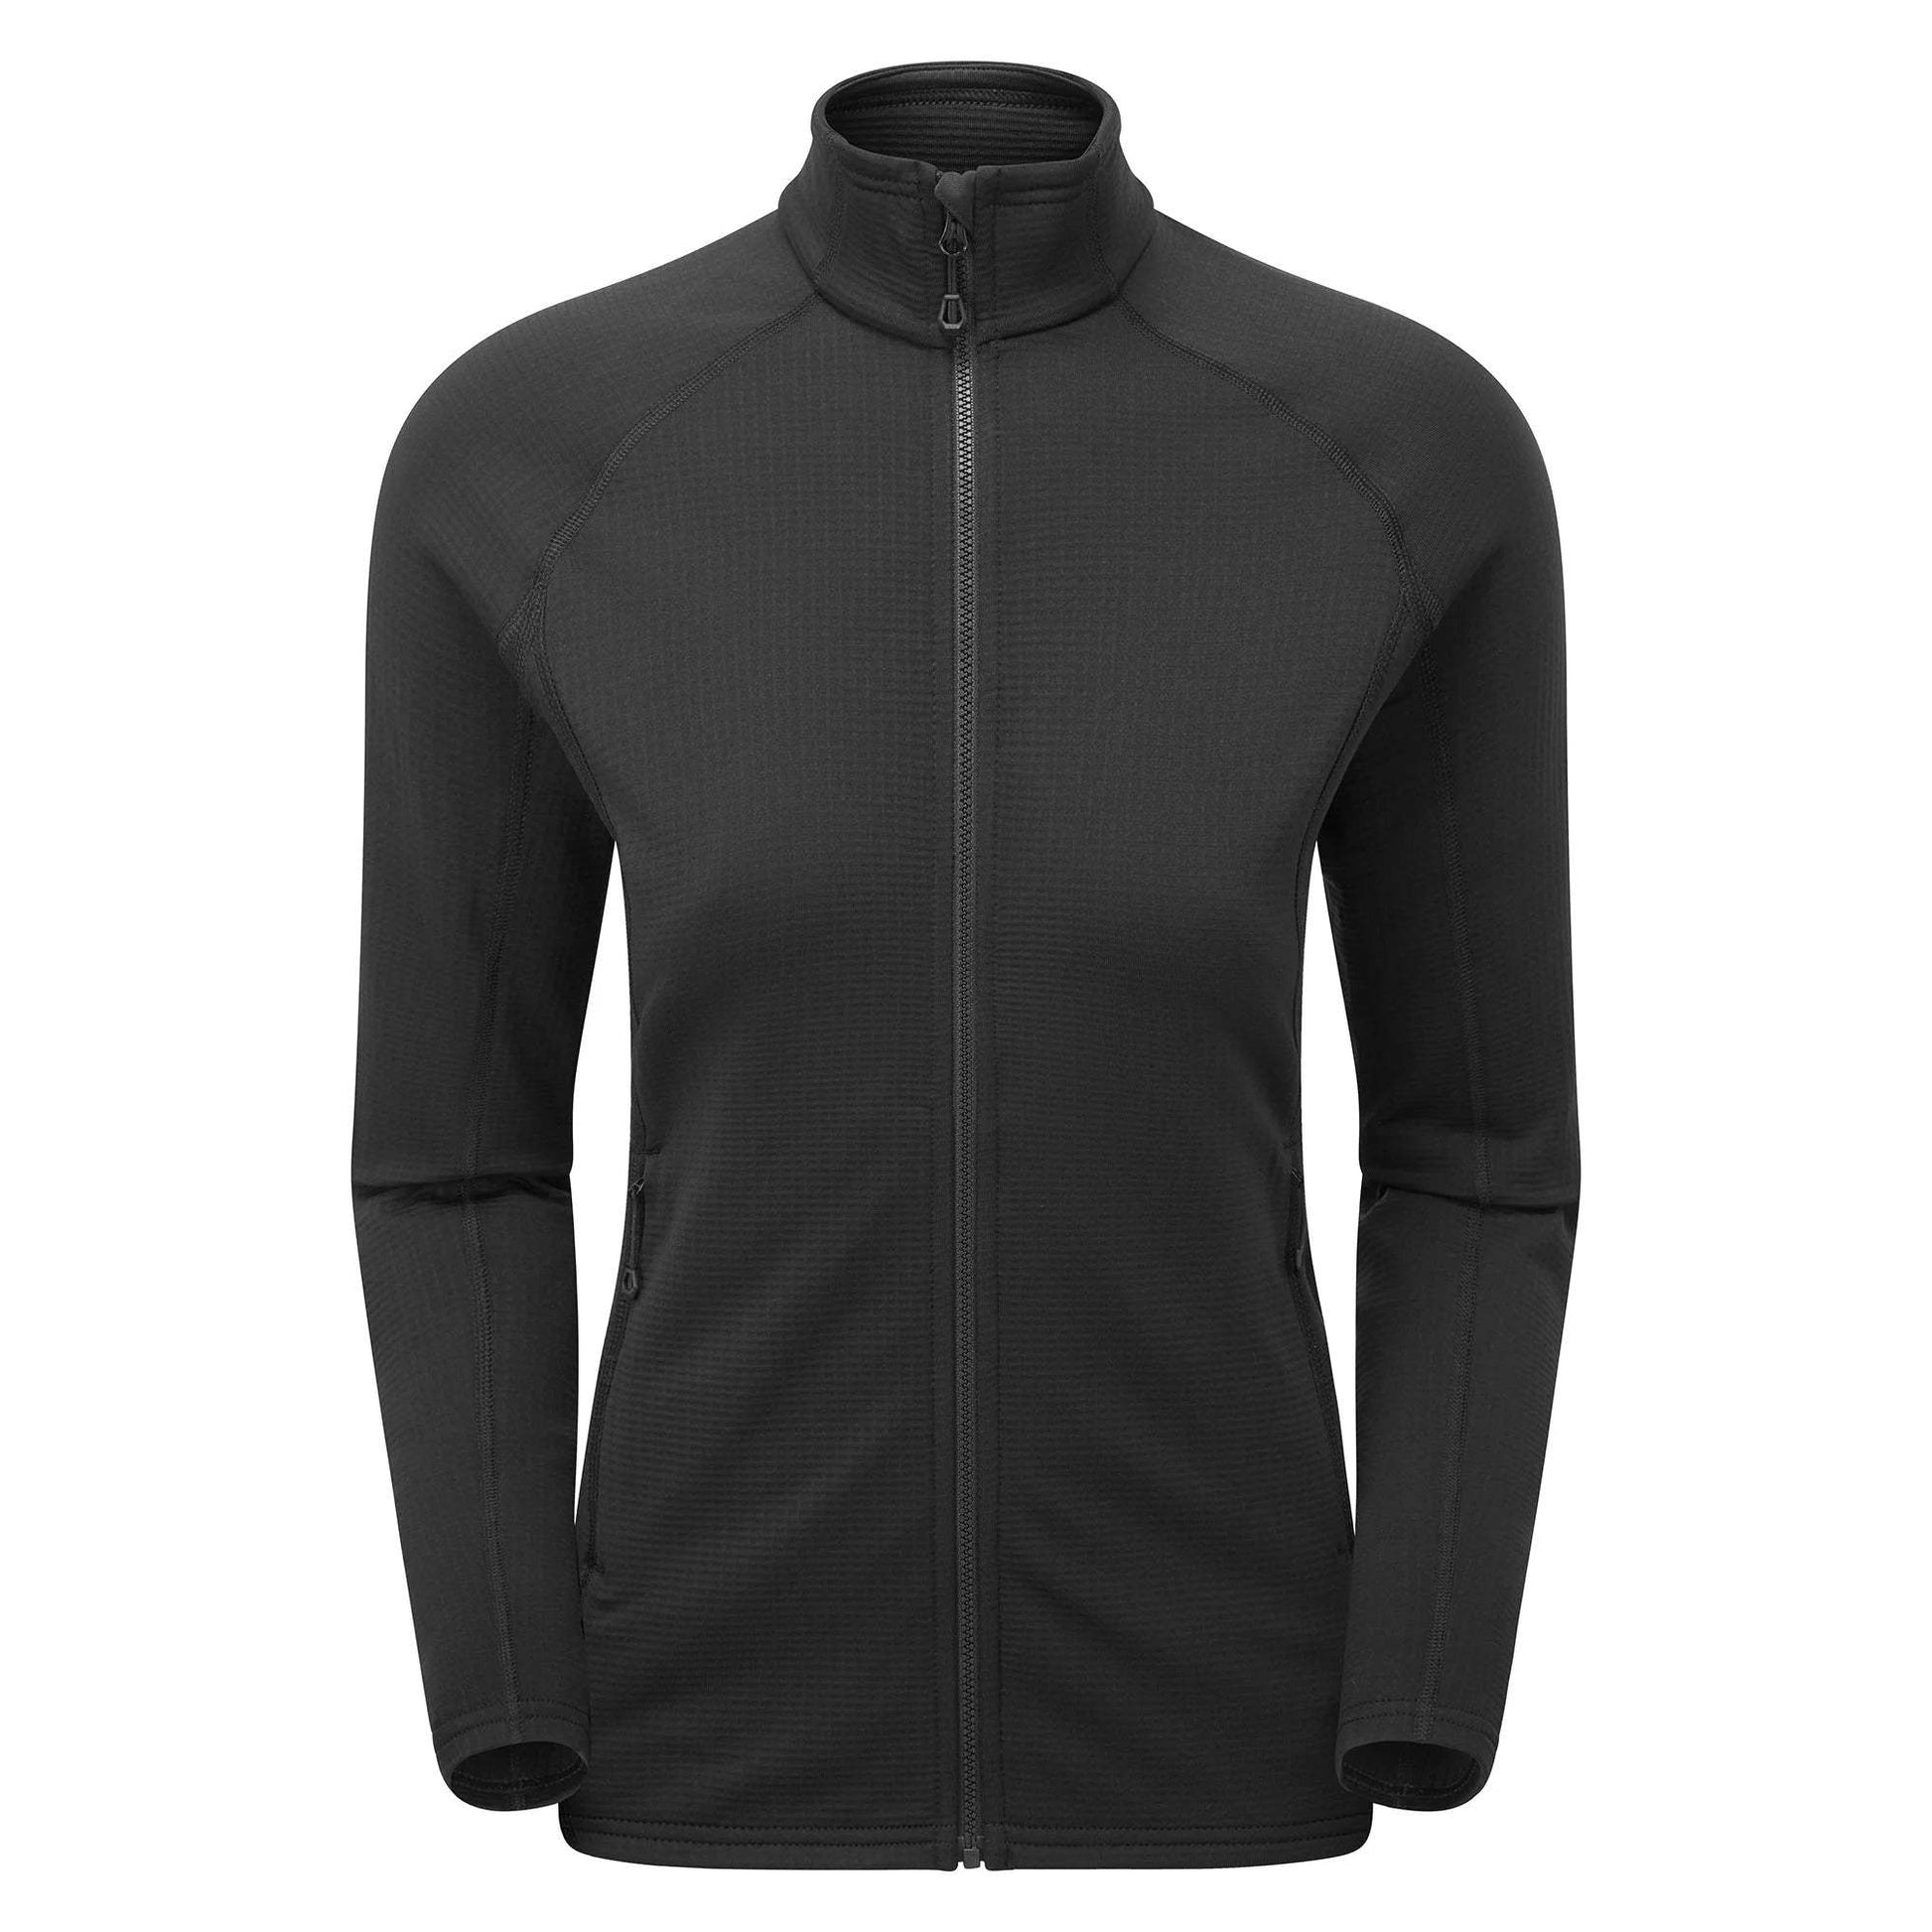 Women's Protium Fleece Jacket by Montane - The Luxury Promotional Gifts Company Limited